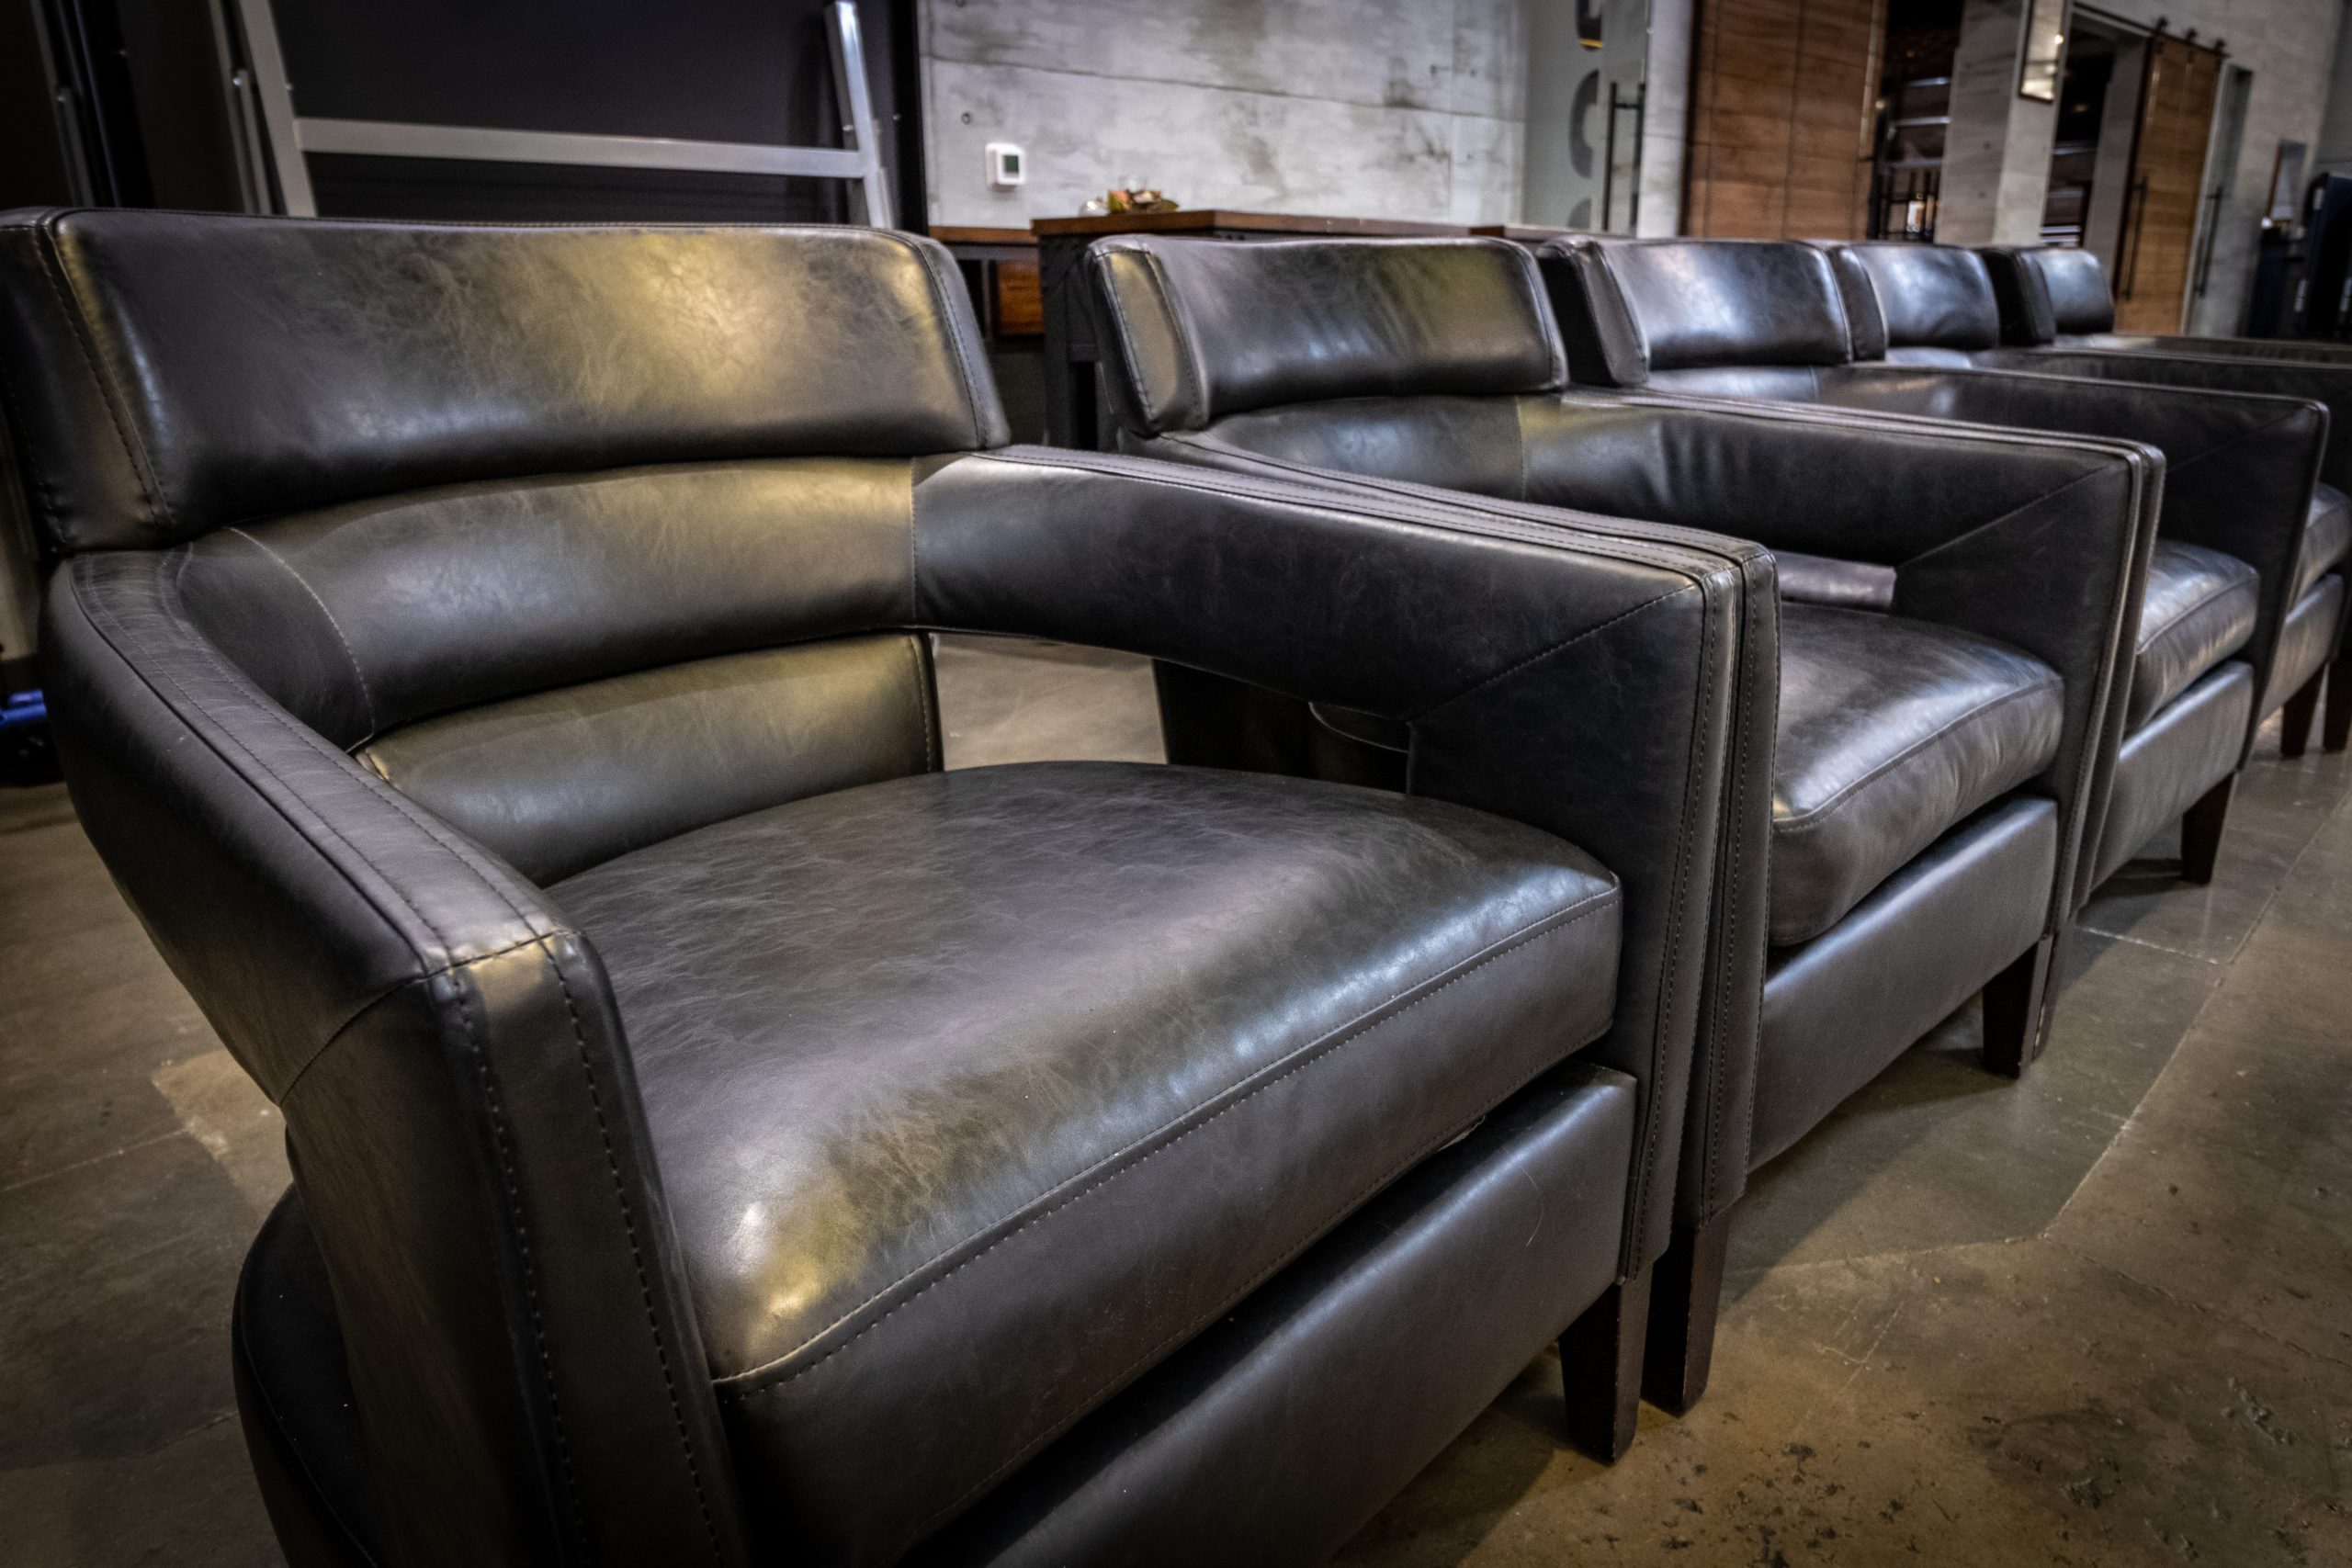 A row of black leather chairs.